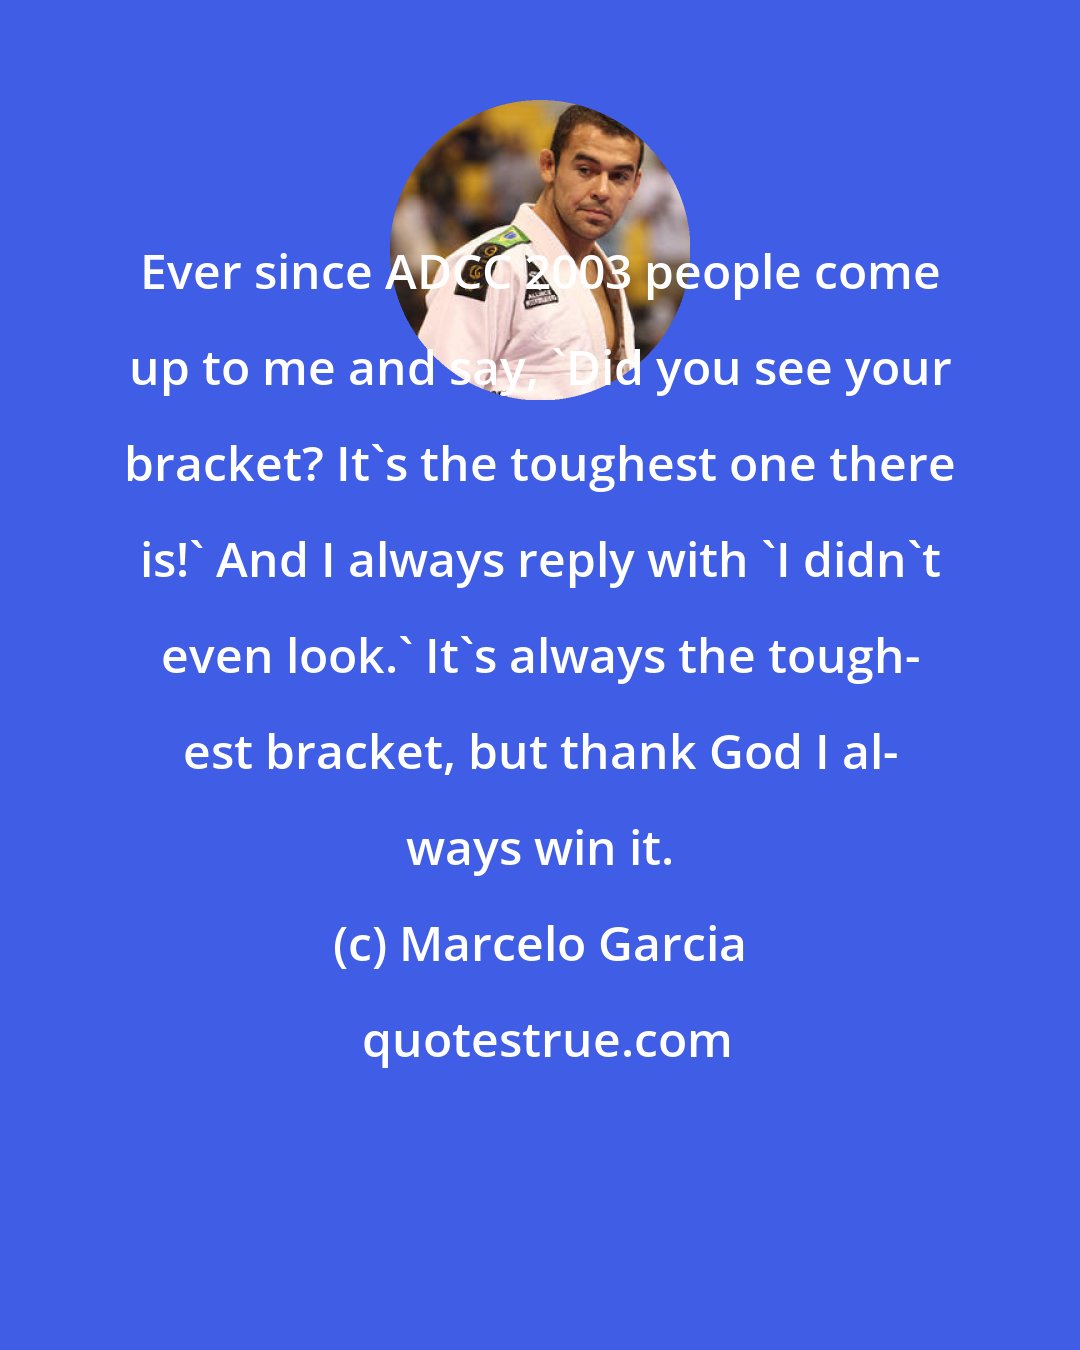 Marcelo Garcia: Ever since ADCC 2003 people come up to me and say, 'Did you see your bracket? It's the toughest one there is!' And I always reply with 'I didn't even look.' It's always the tough- est bracket, but thank God I al- ways win it.